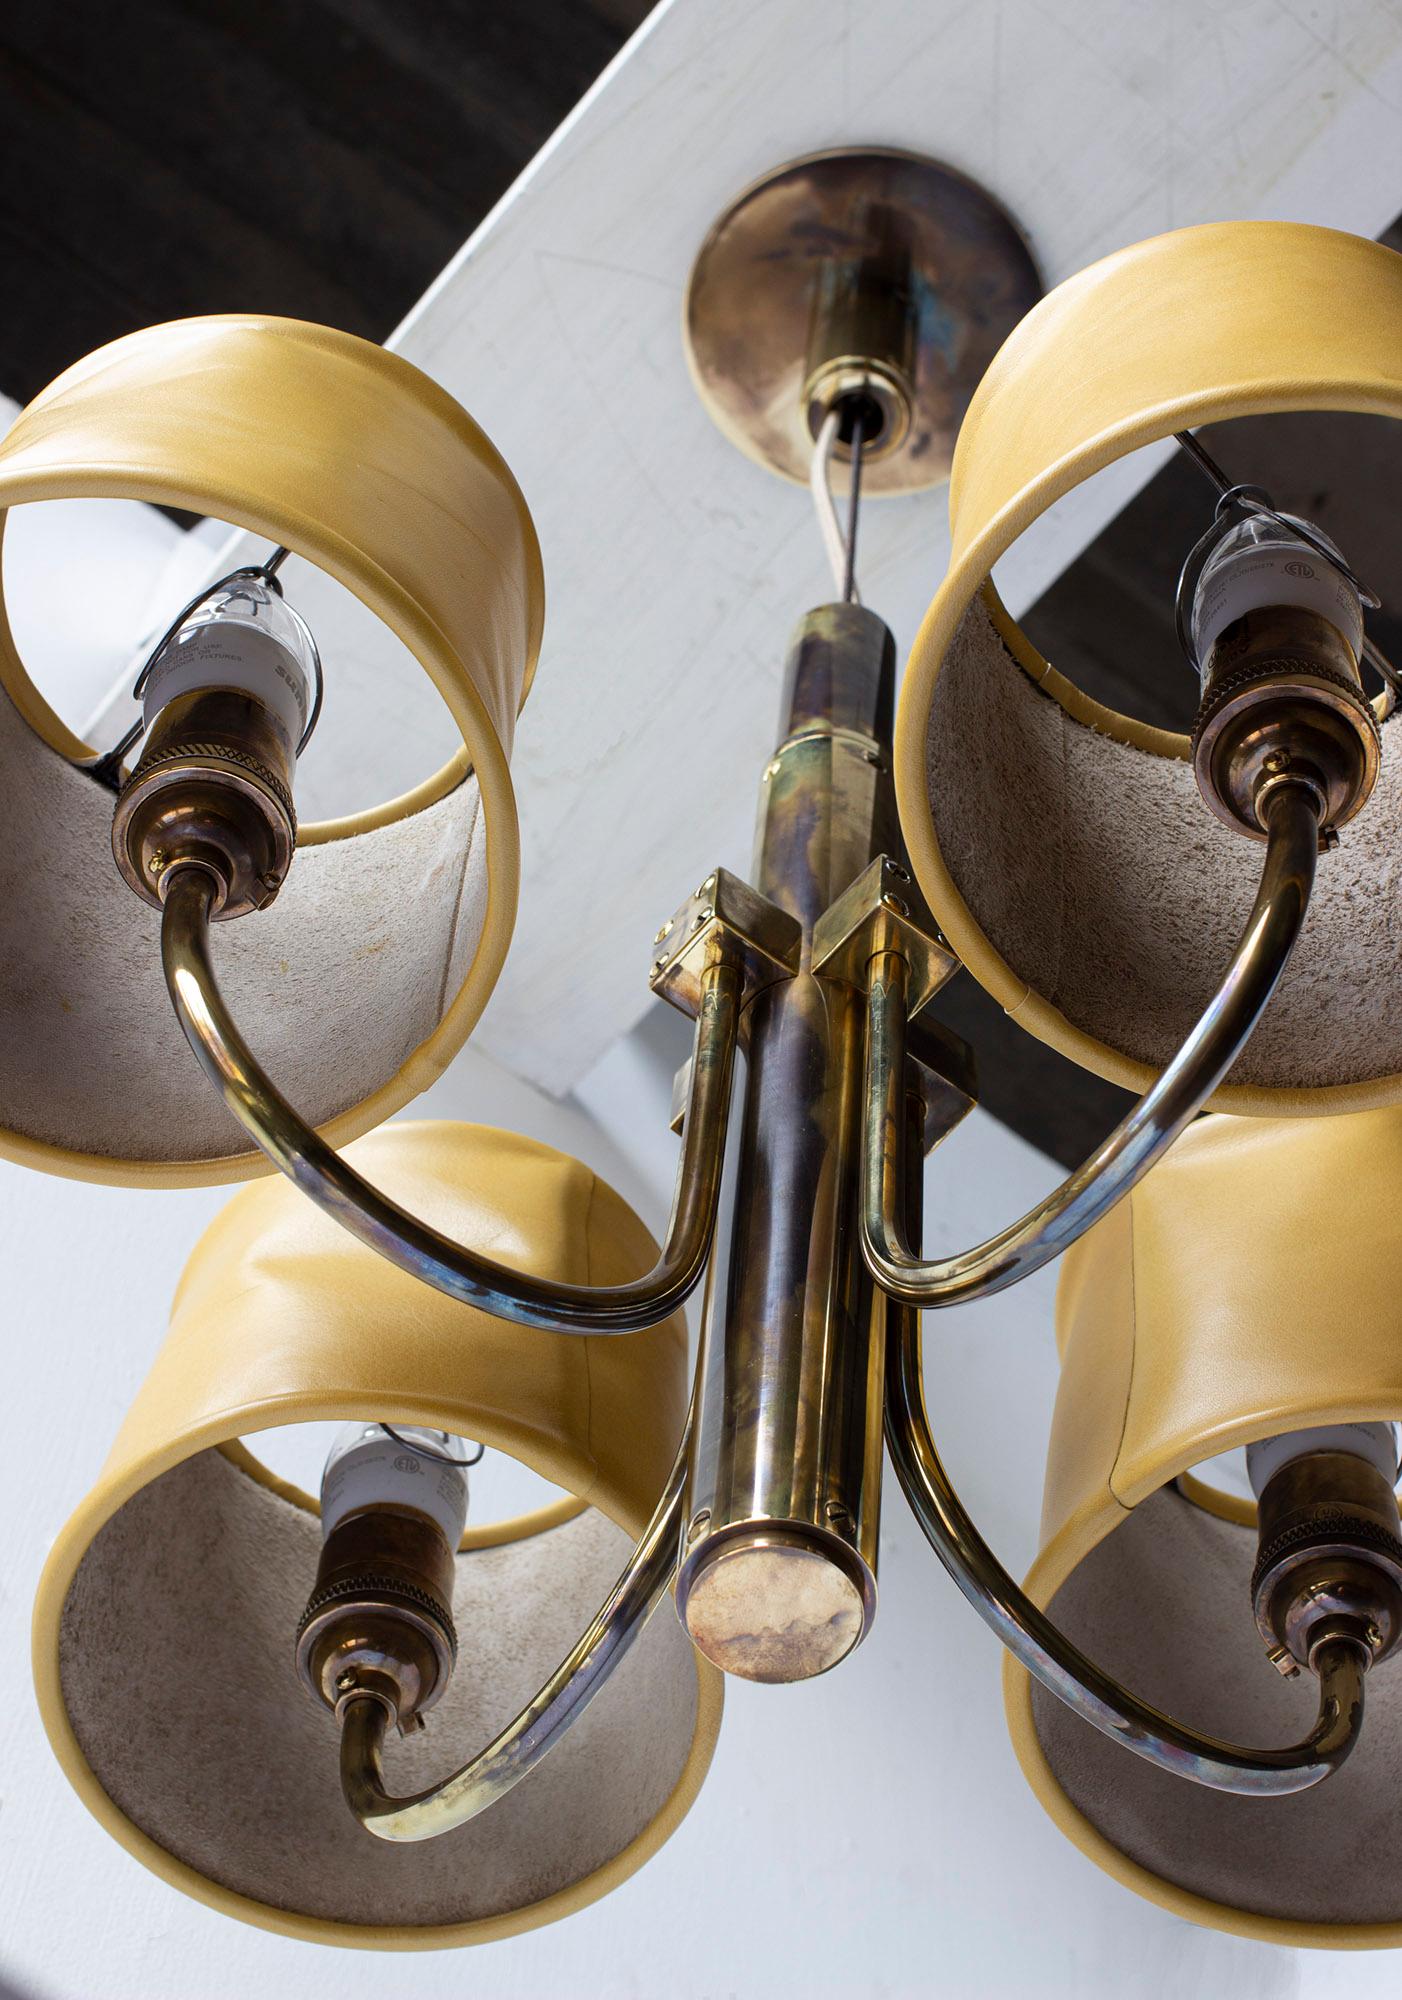 American Series01 Upright Electrolier, Smoke Patinated Brass, Mustard Leather Shades For Sale